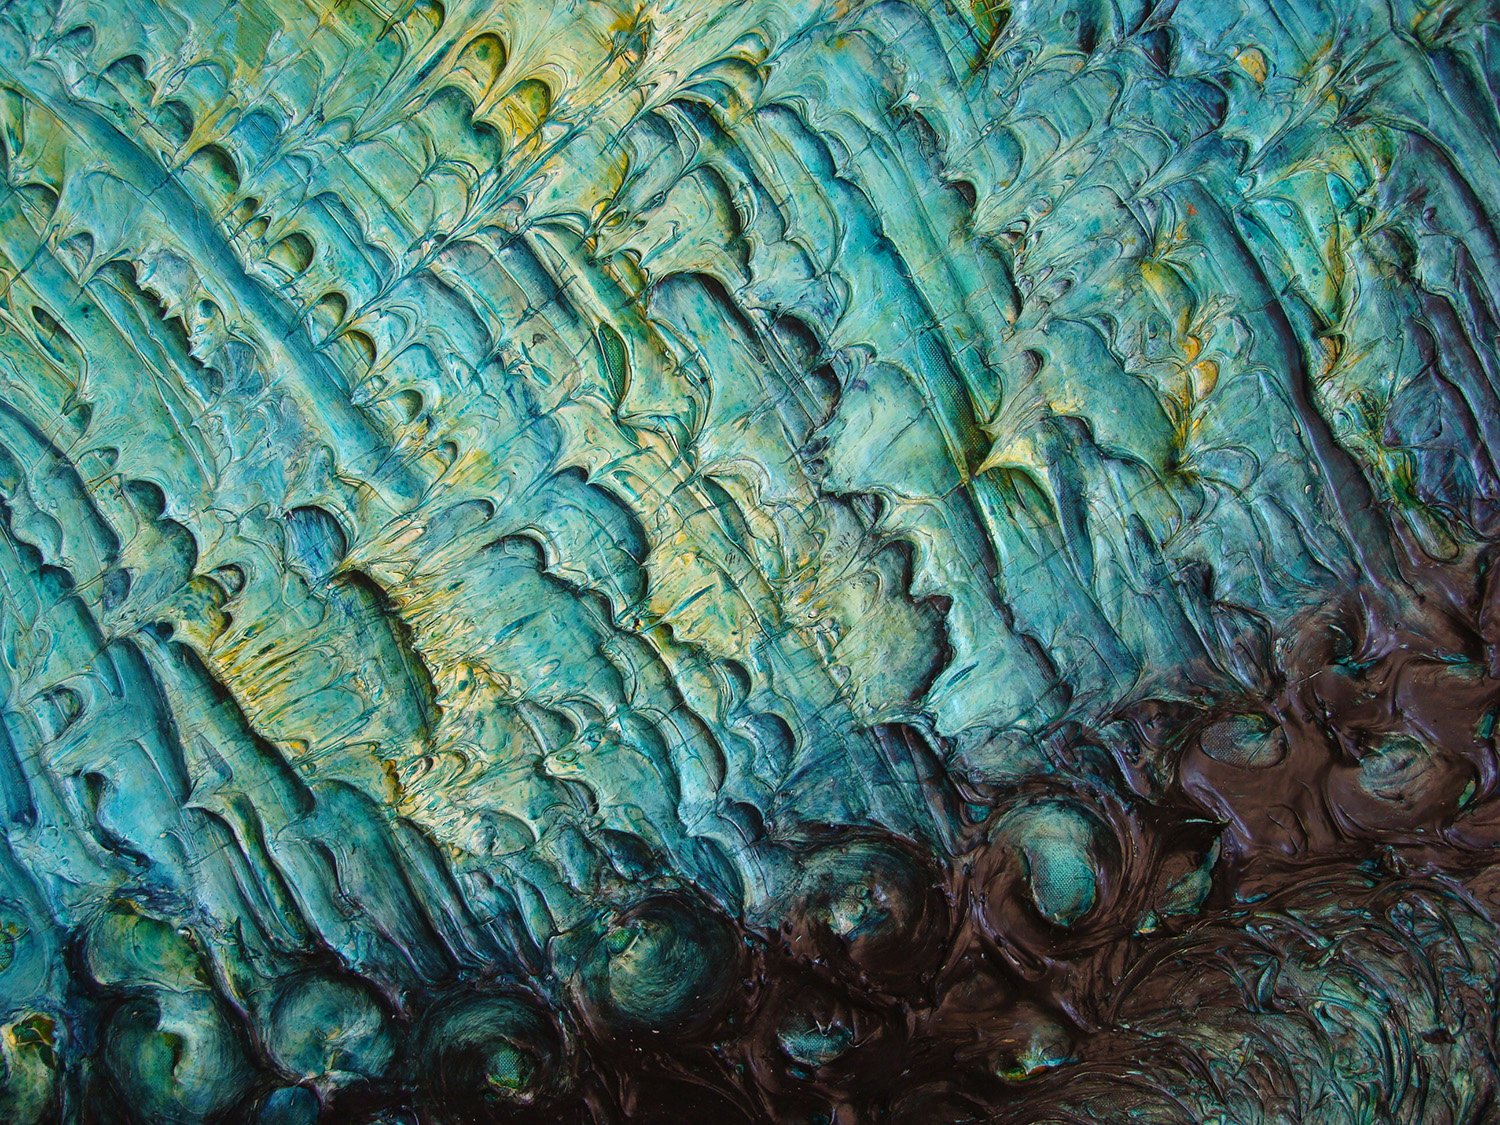   Blue is Turning  (detail), 2010, mixed media, 40” x 30” 